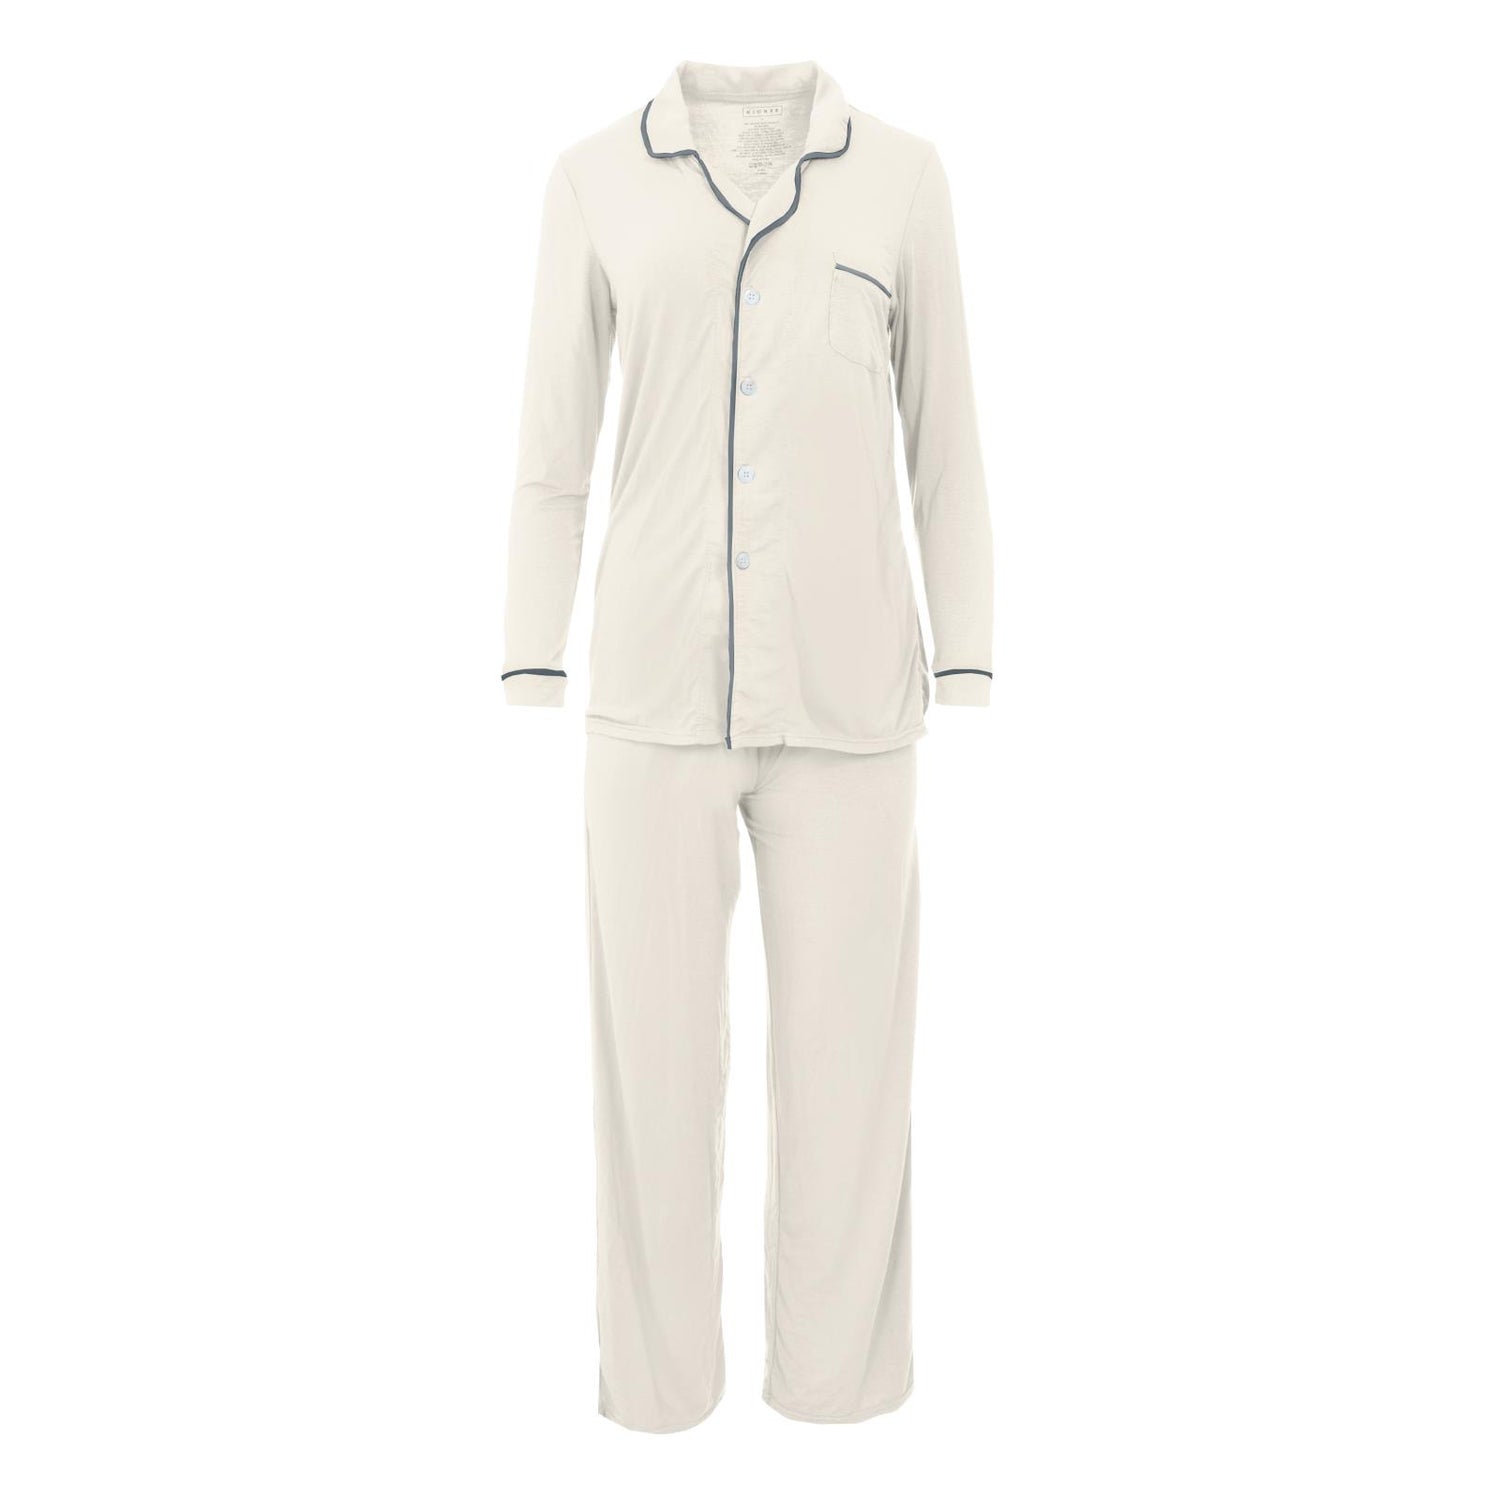 Women's Solid Long Sleeved Collared Pajama Set in Natural with Slate